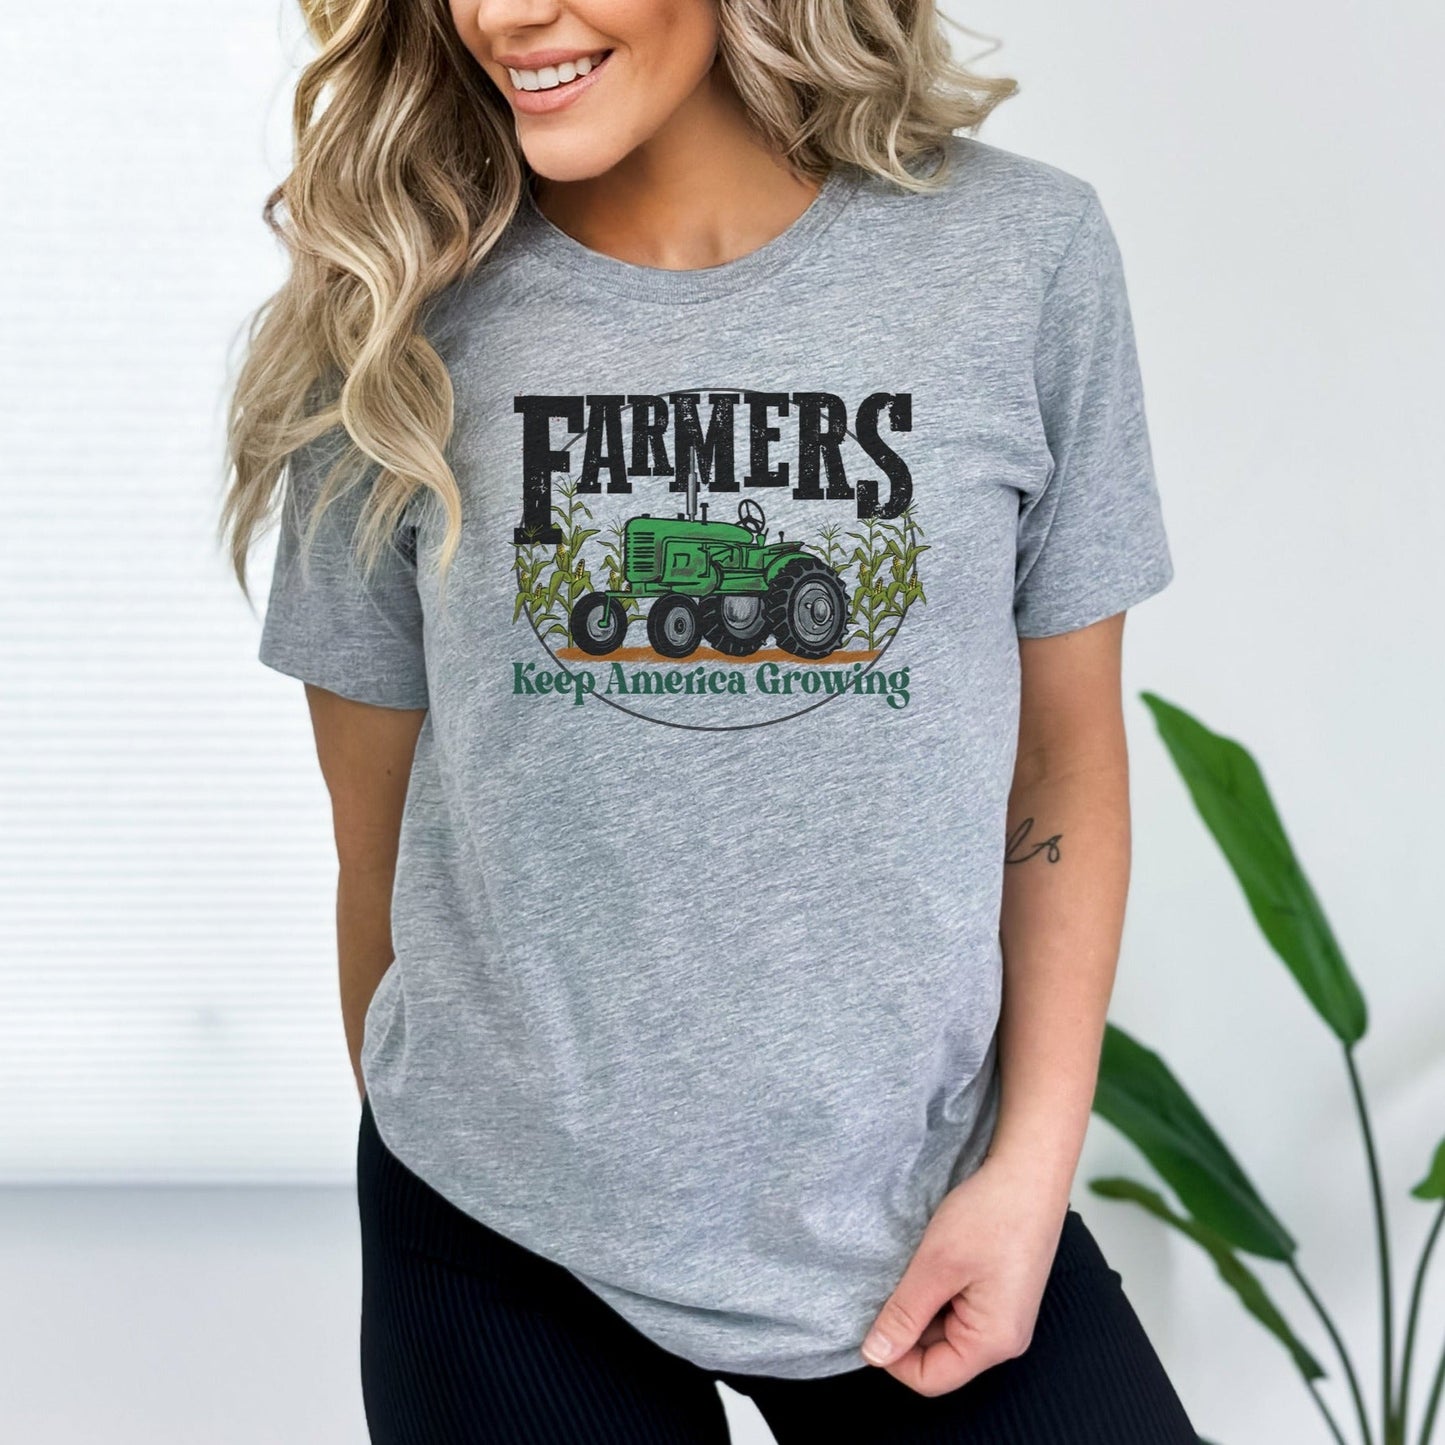 ADULT SIZE "Farmers Keep America Growing" Grey T-shirt with Green Tractor